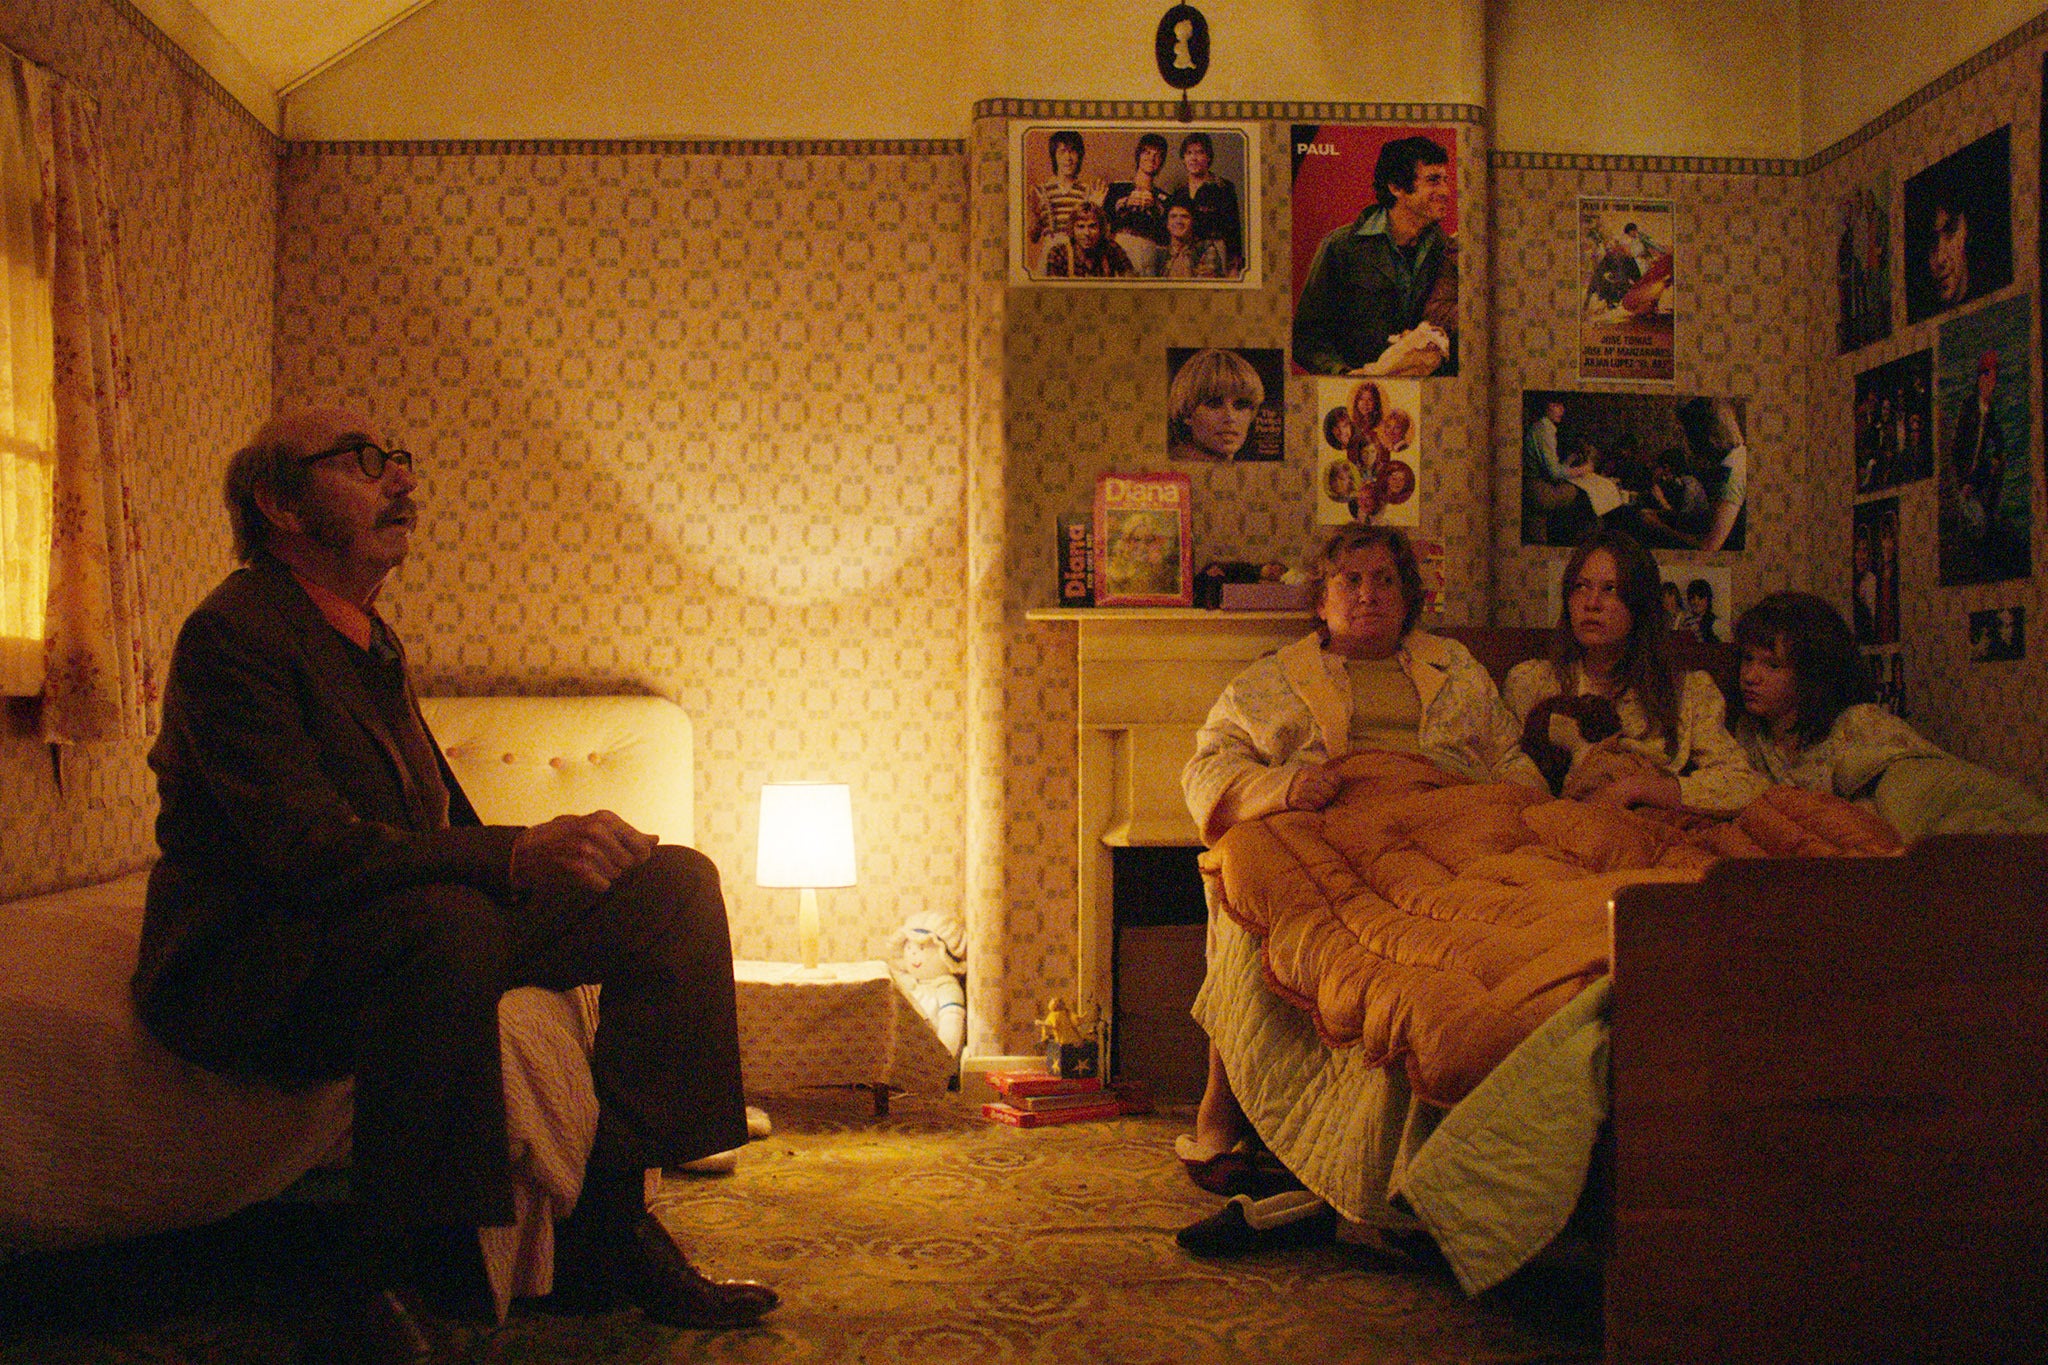 An upcoming docu-drama on the Enfield Poltergeist is due to premiere on Apple TV+